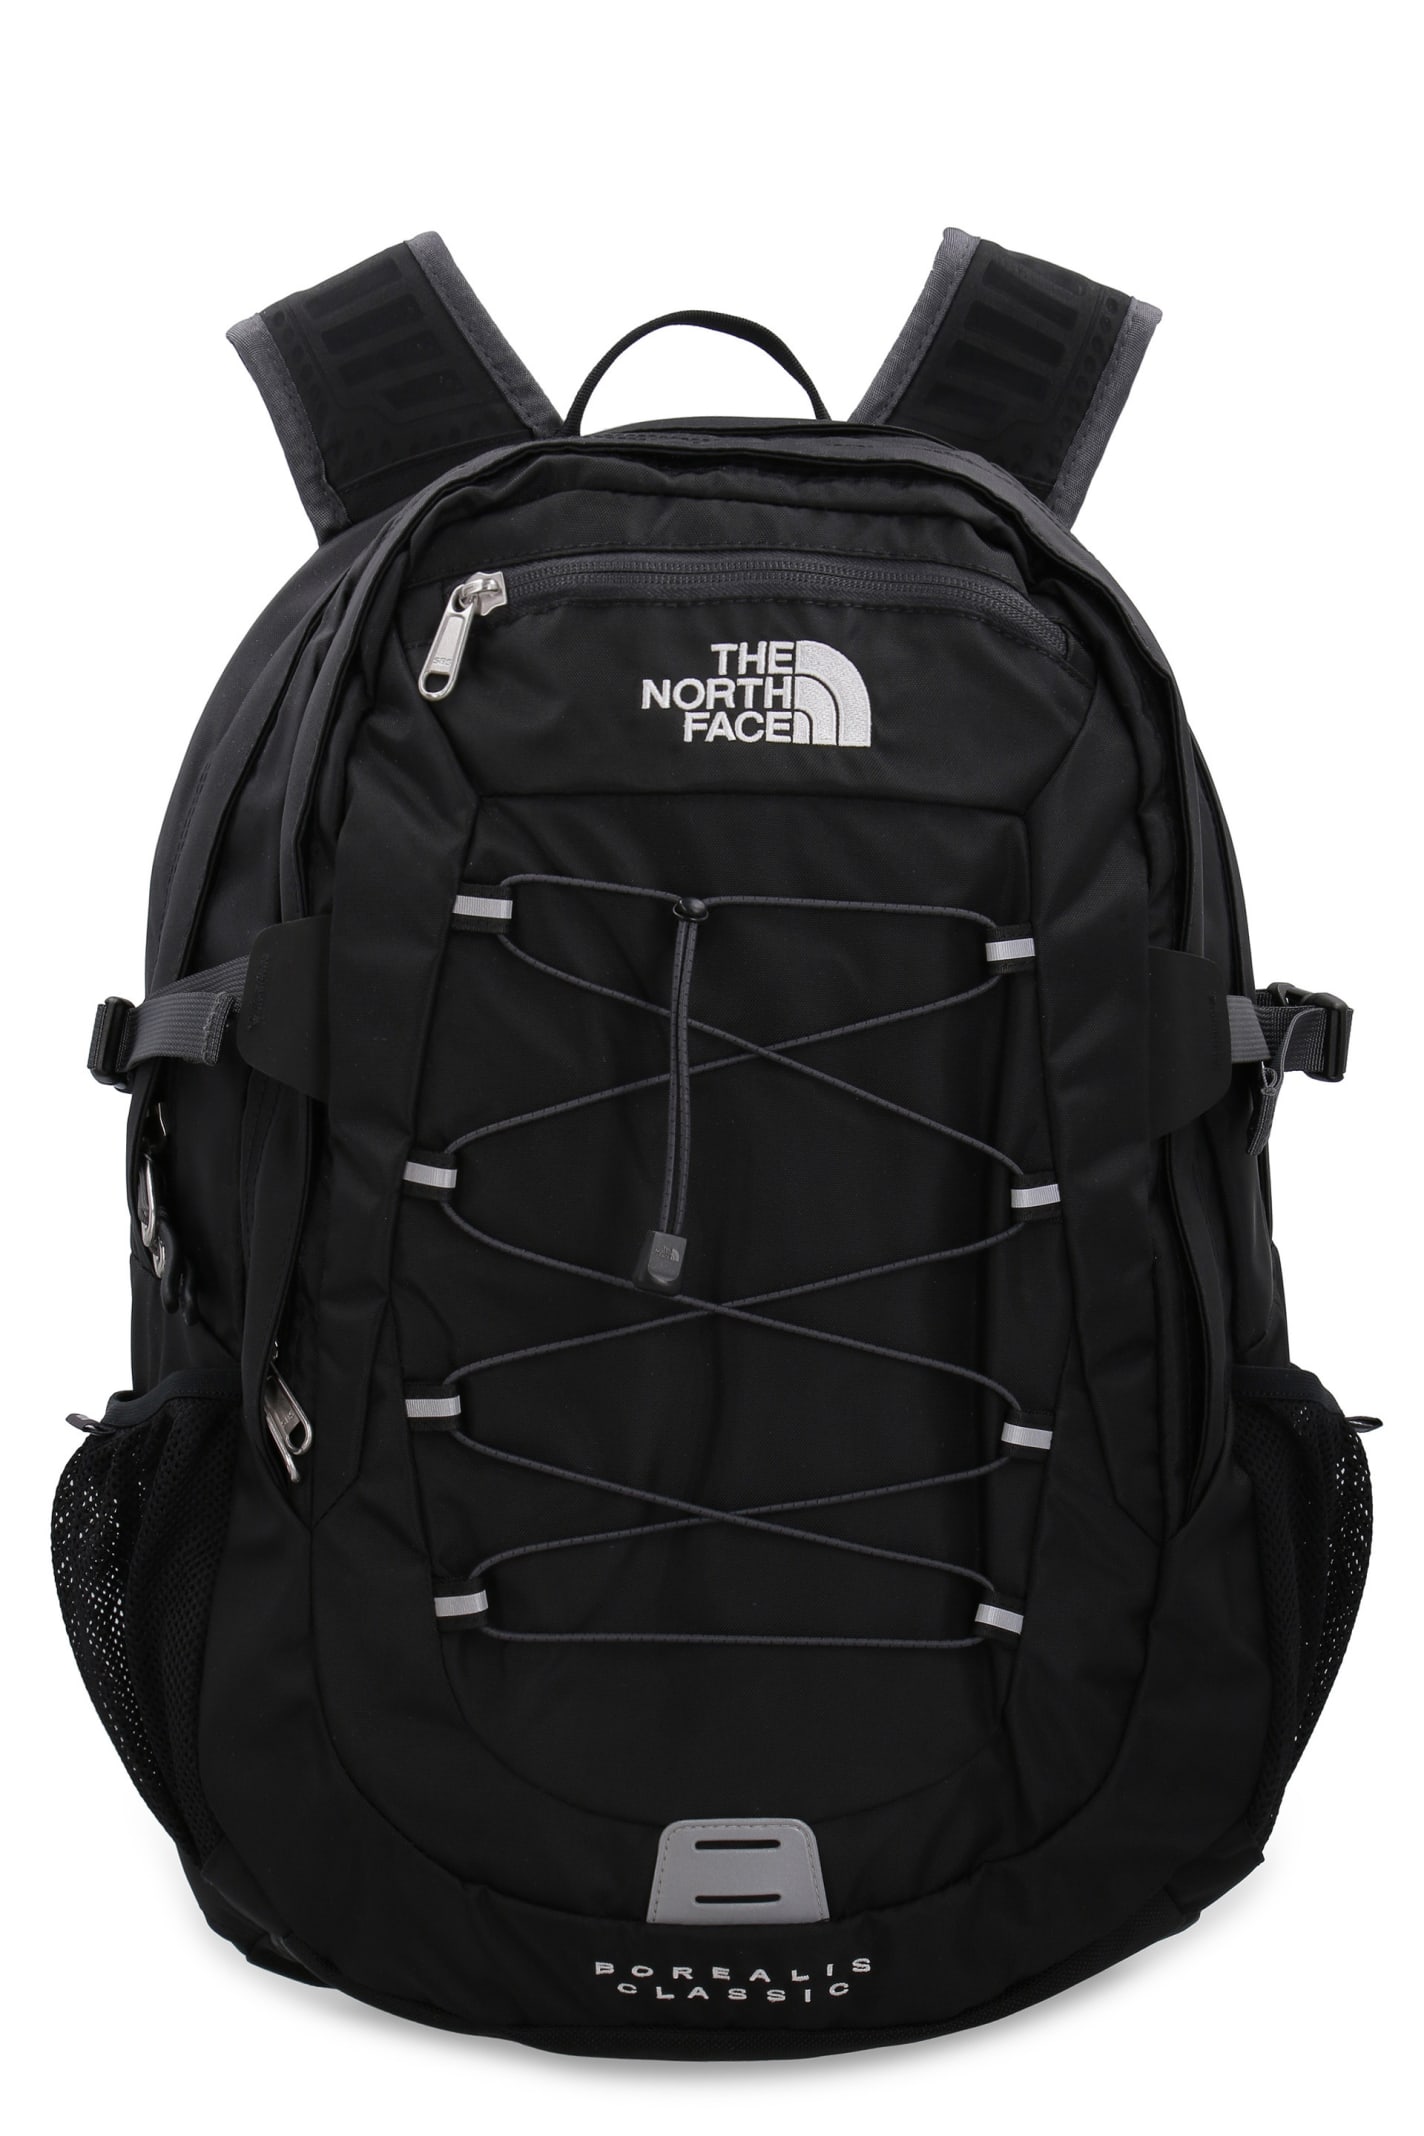 The North Face Borealis Technical Fabric Backpack